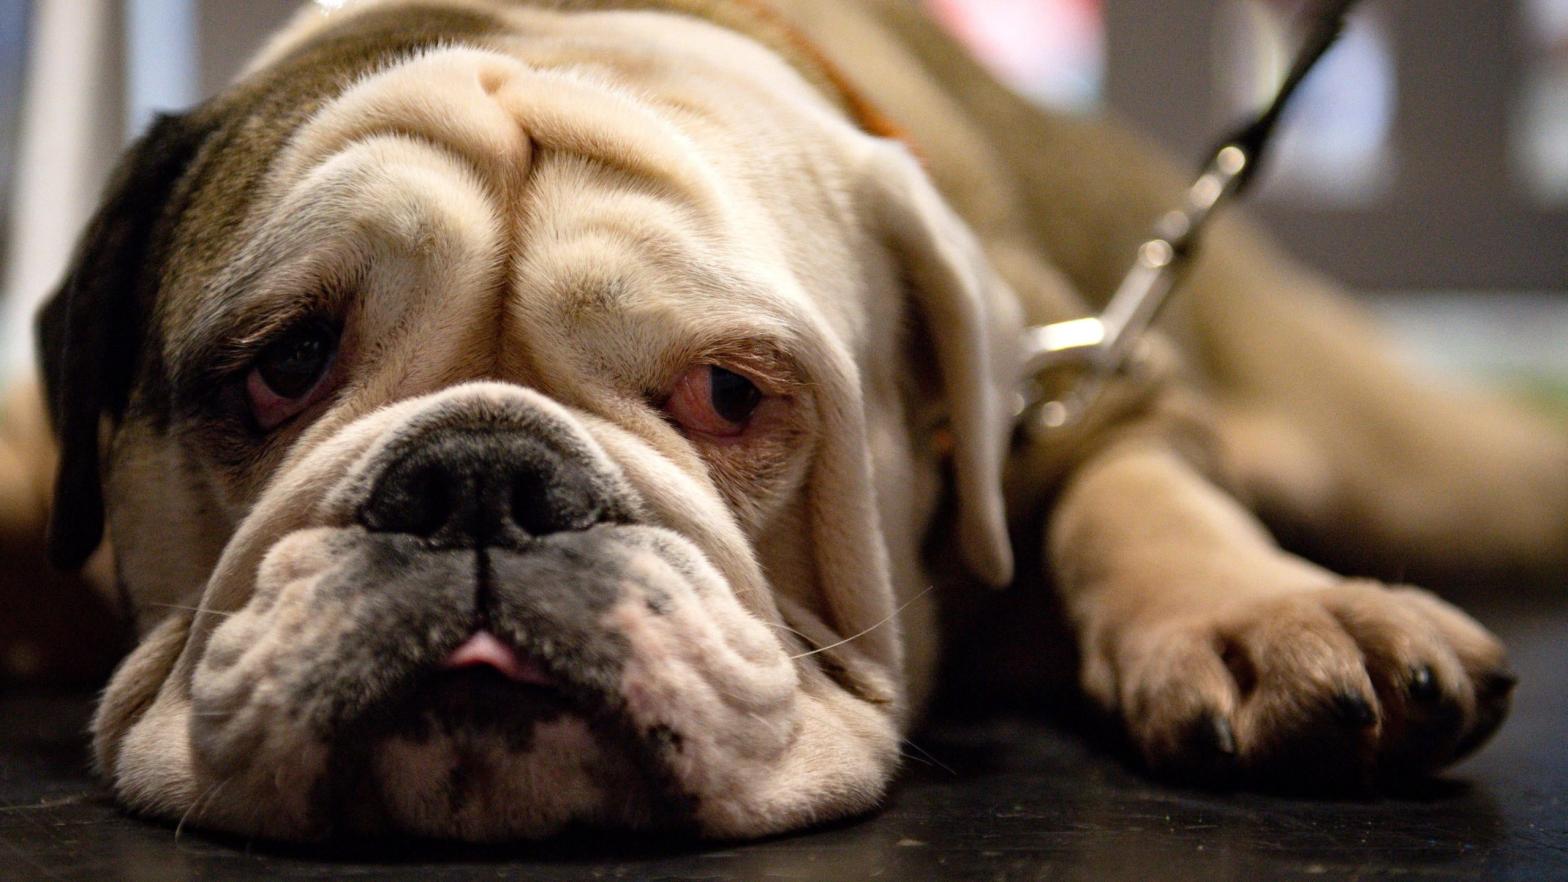 English bulldogs are especially prone to breathing and other health problems due to their unique body and facial shape created through breeding.  (Photo: Jacob King/PA Wire, AP)